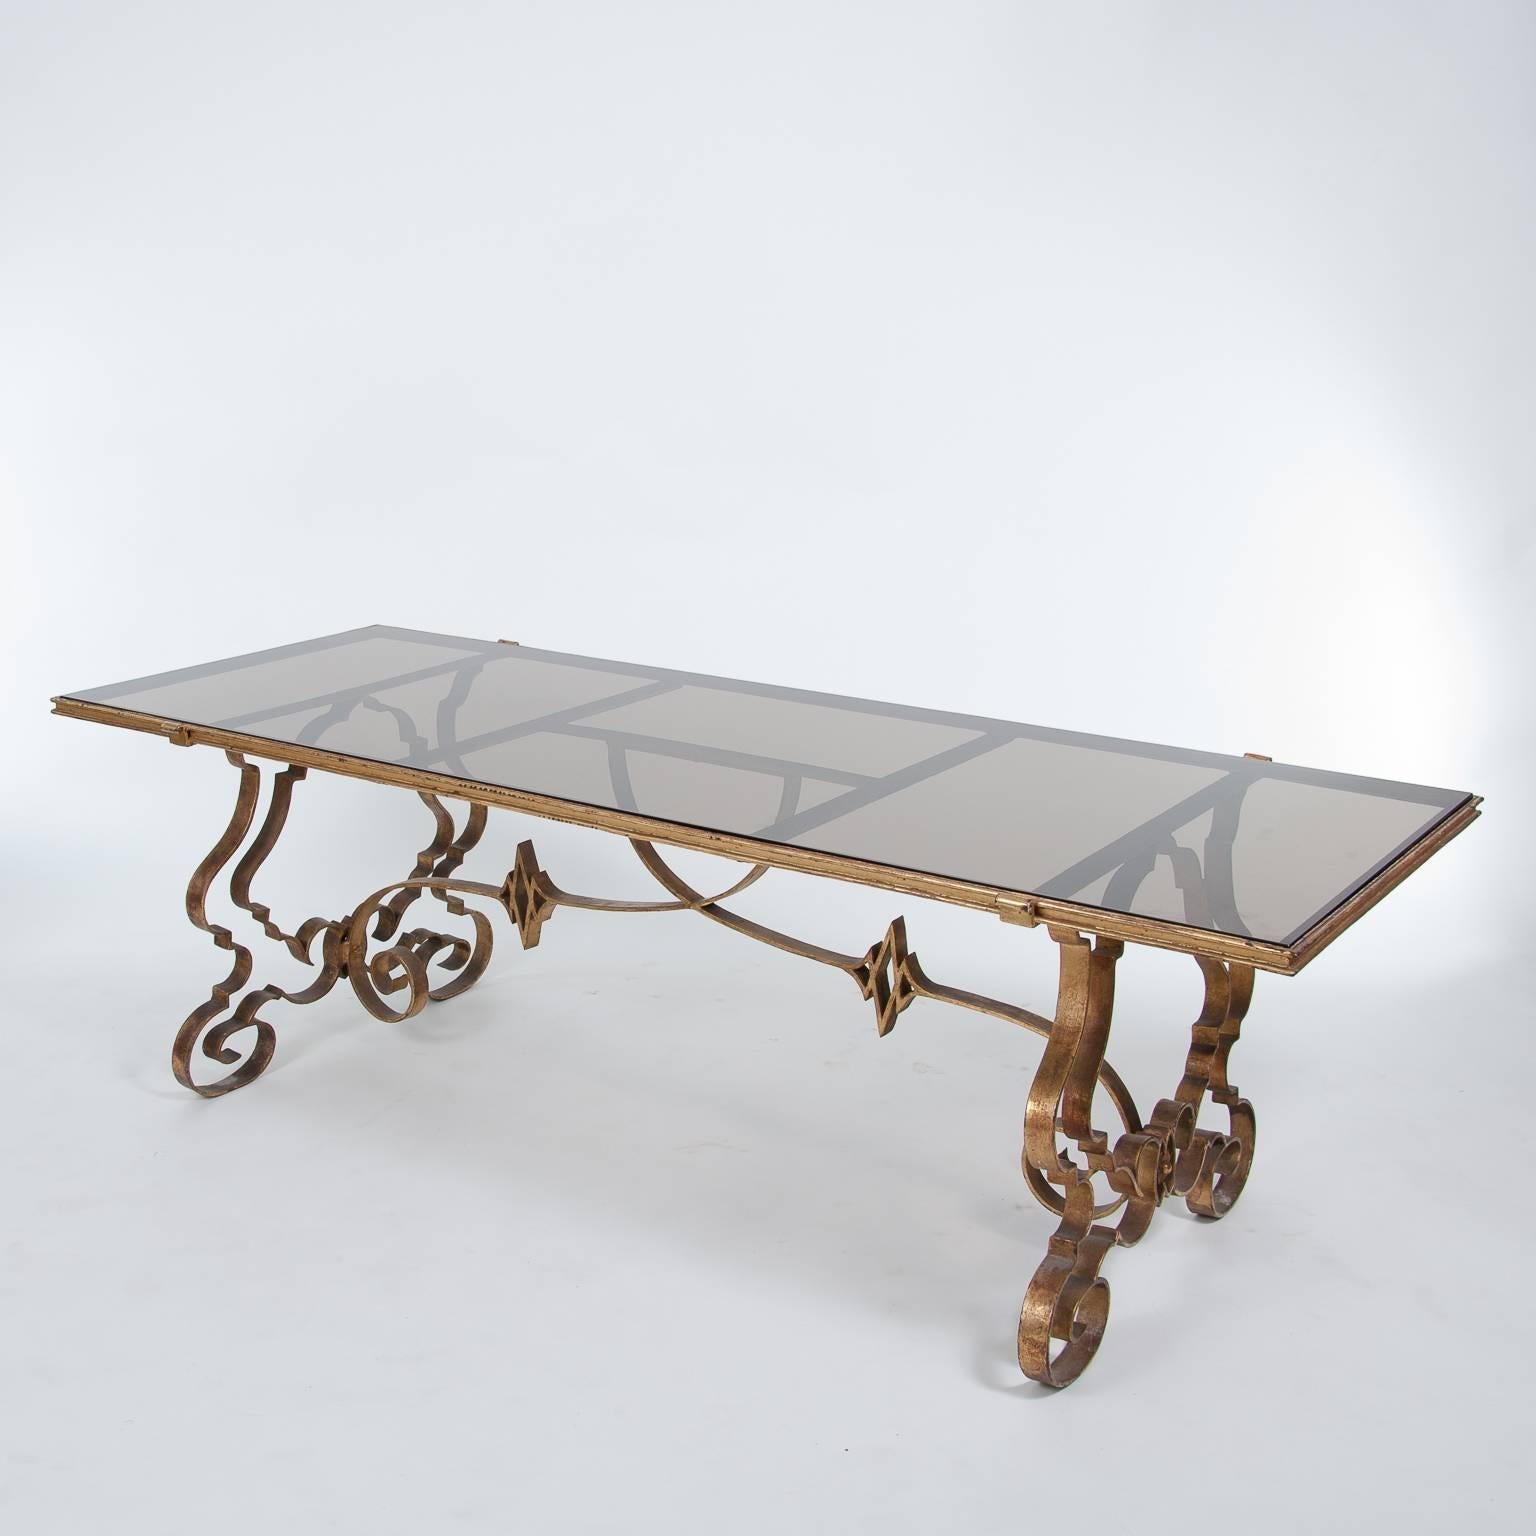 This elegant neoclassical French coffee table is made of a elegant shaped solid brass base. The glass top is in an excellent condition.